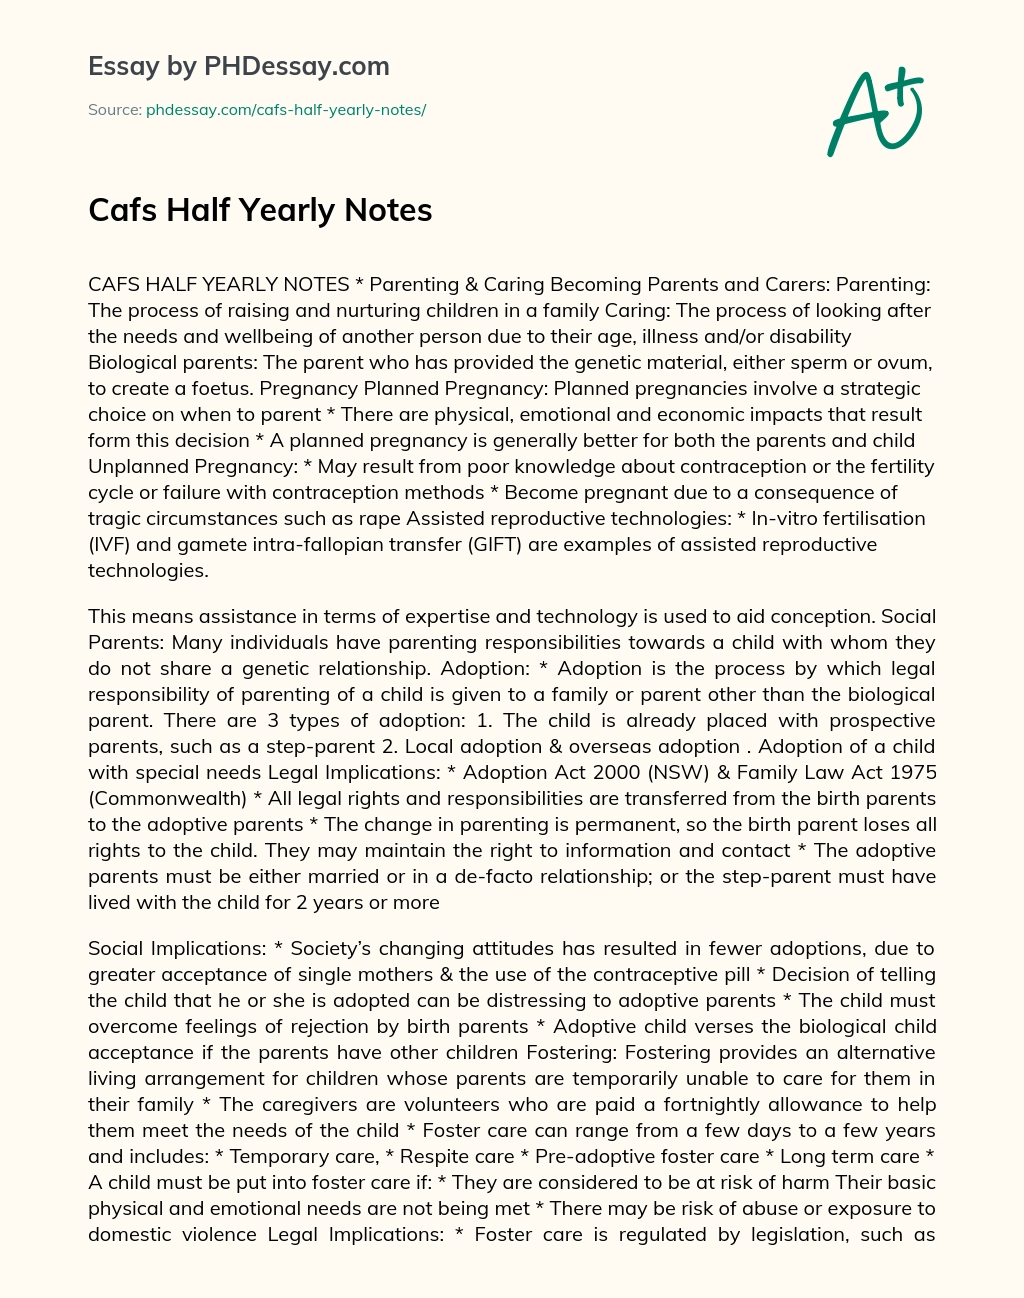 Cafs Half Yearly Notes essay